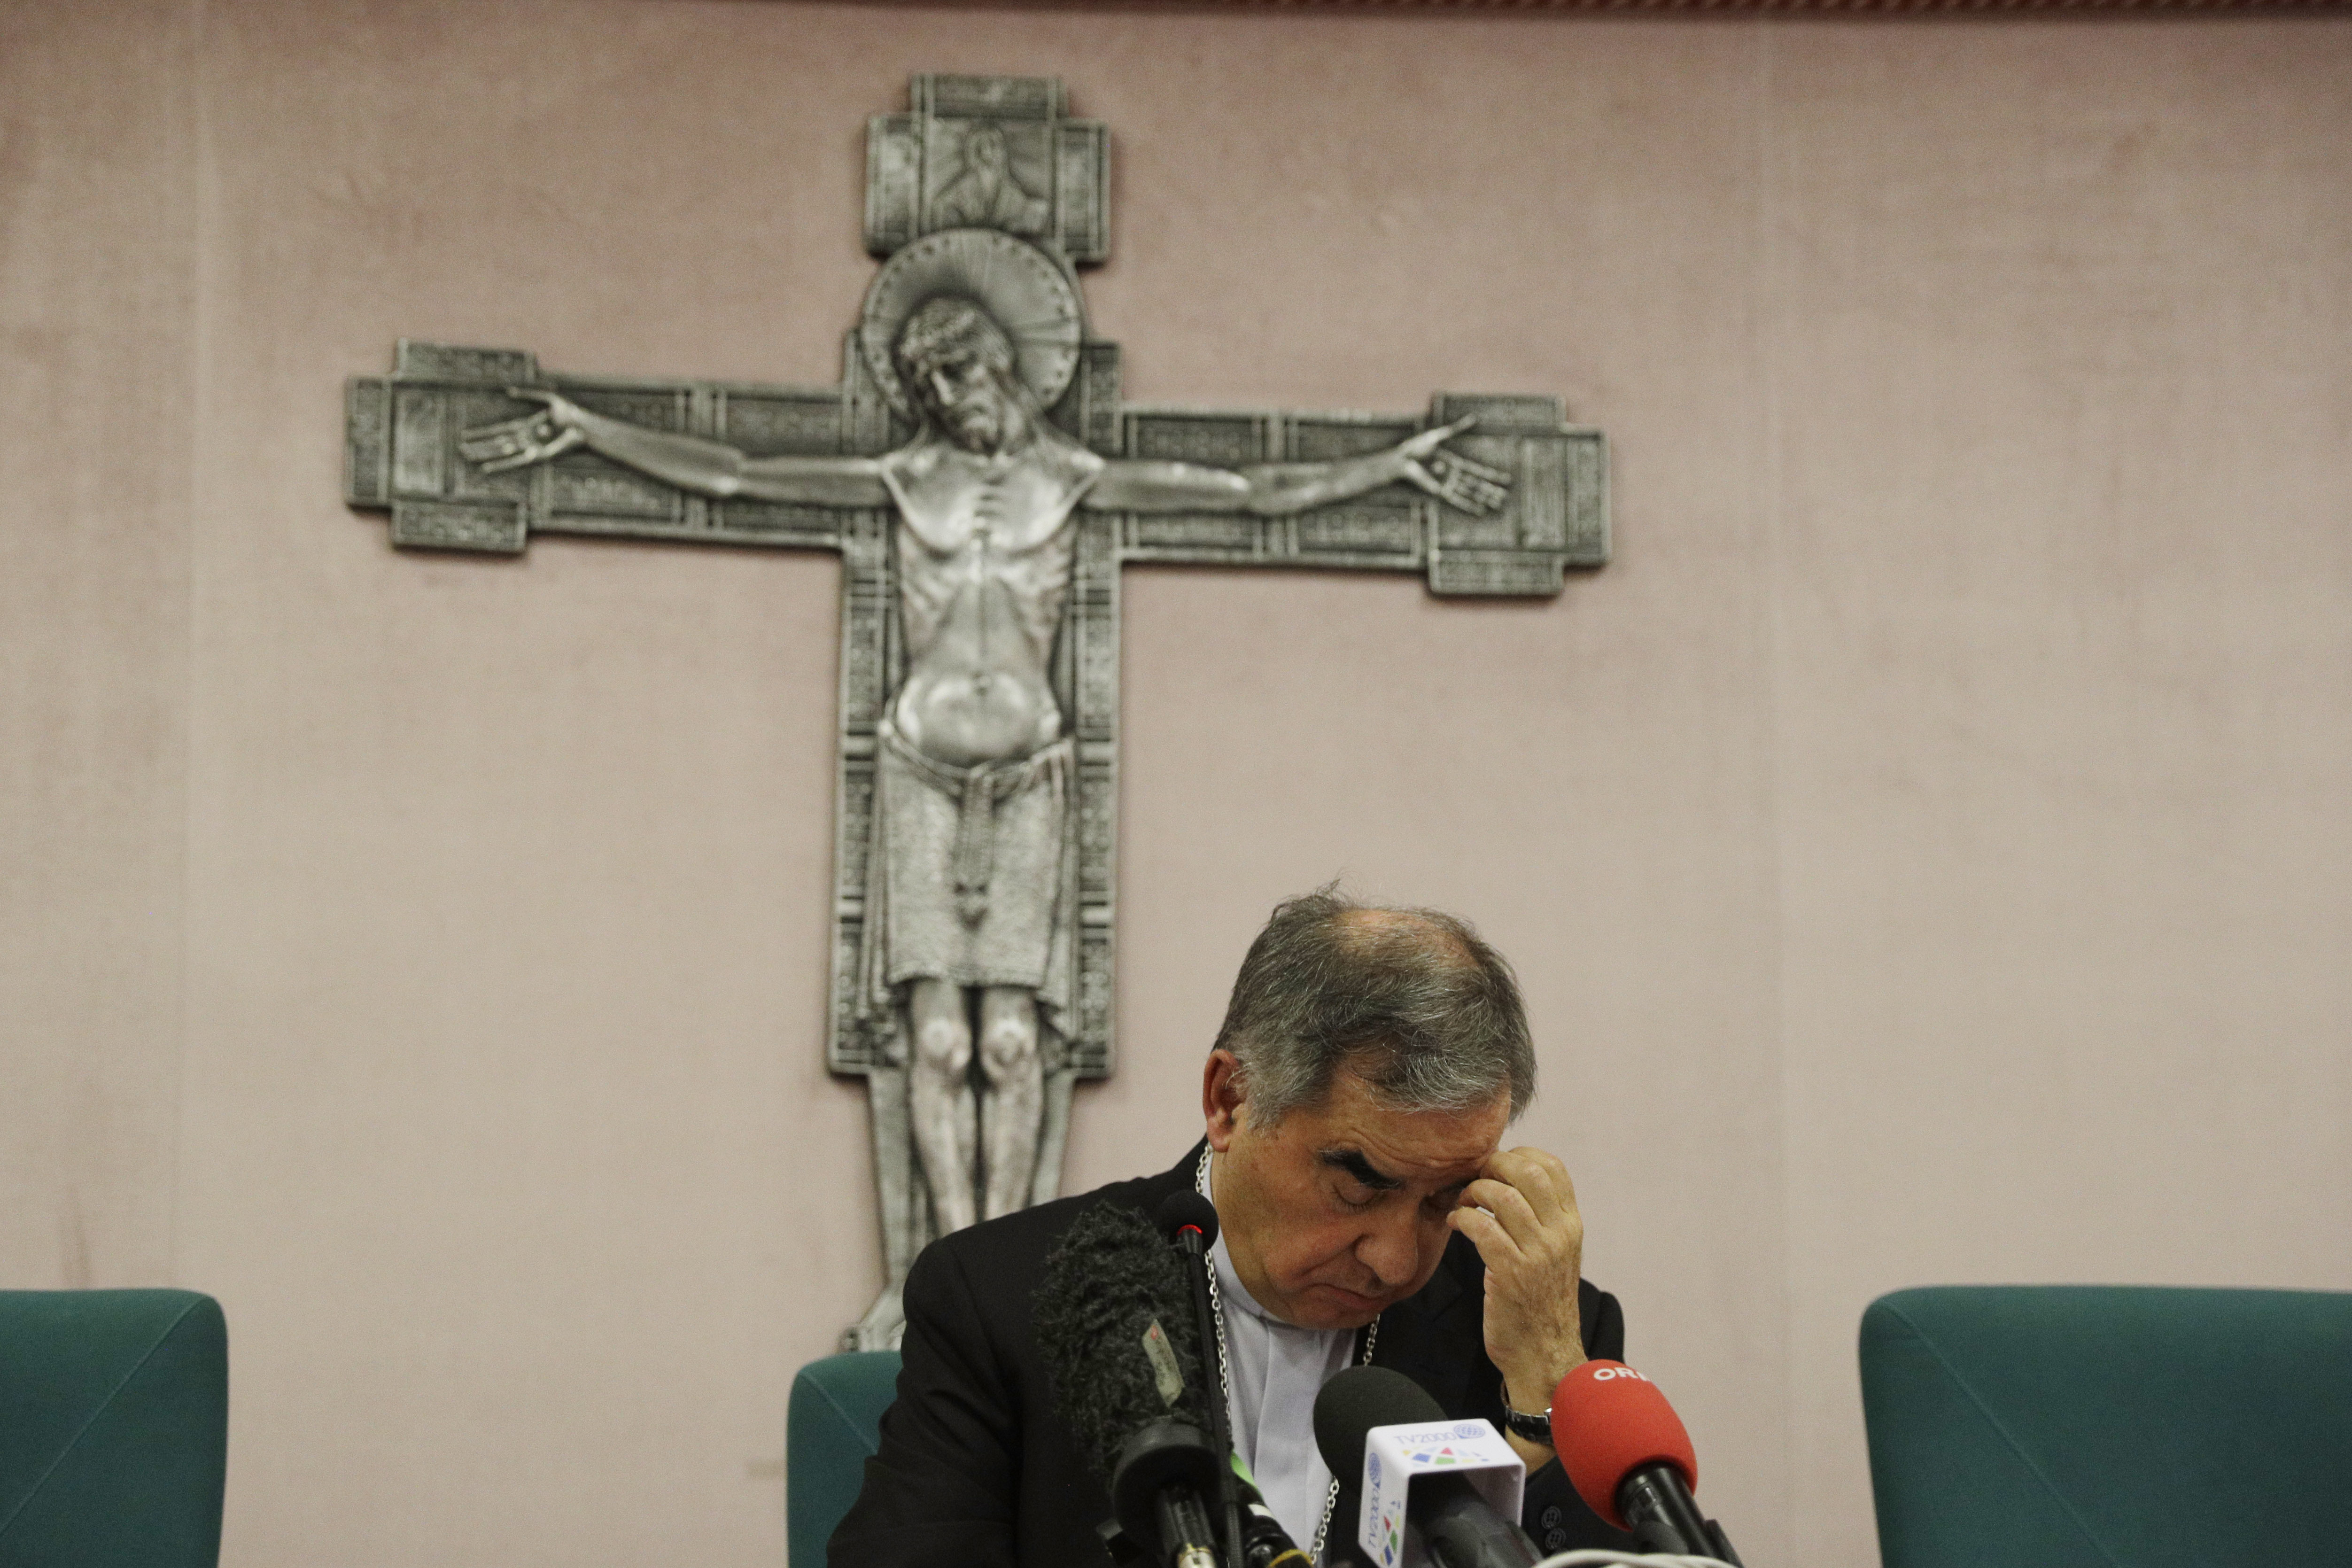 Angelo Becciu, the main defendant in a trial in the Vatican for alleged financial irregularities, was accused today by the former consultant Francesca Chaoqui (AP Photo/Gregorio Borgia, File)